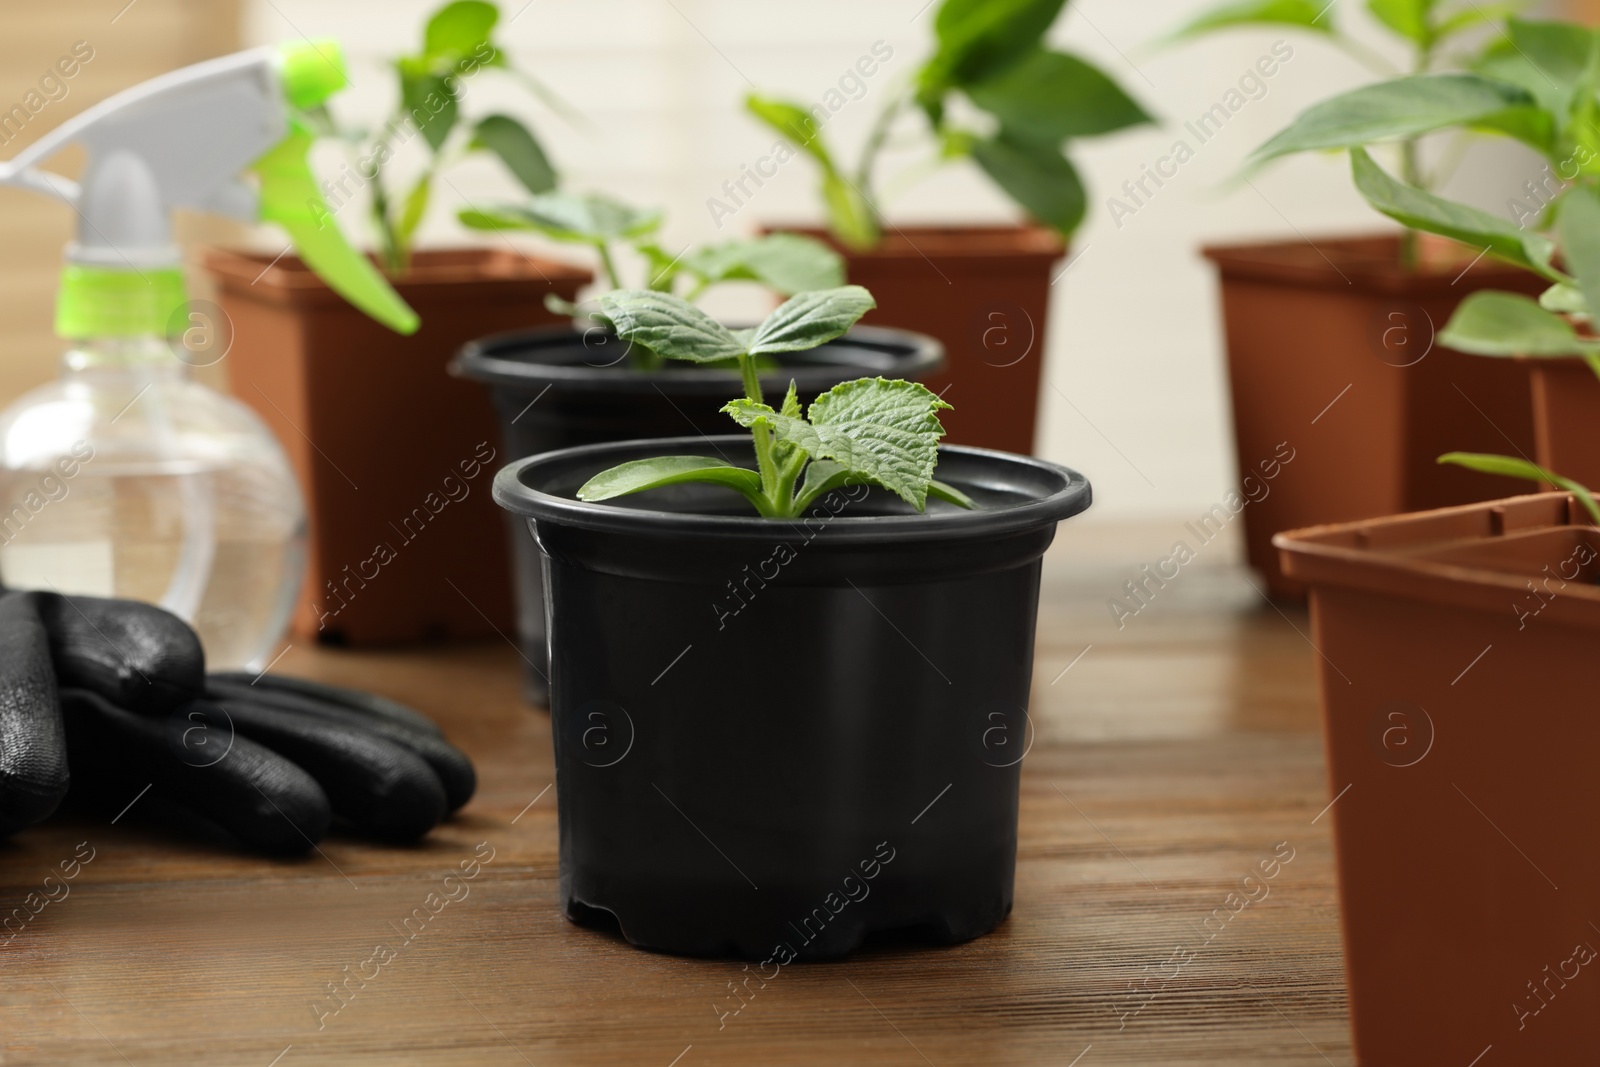 Photo of Seedlings growing in plastic containers with soil, gardening gloves and spray bottle on wooden table, closeup